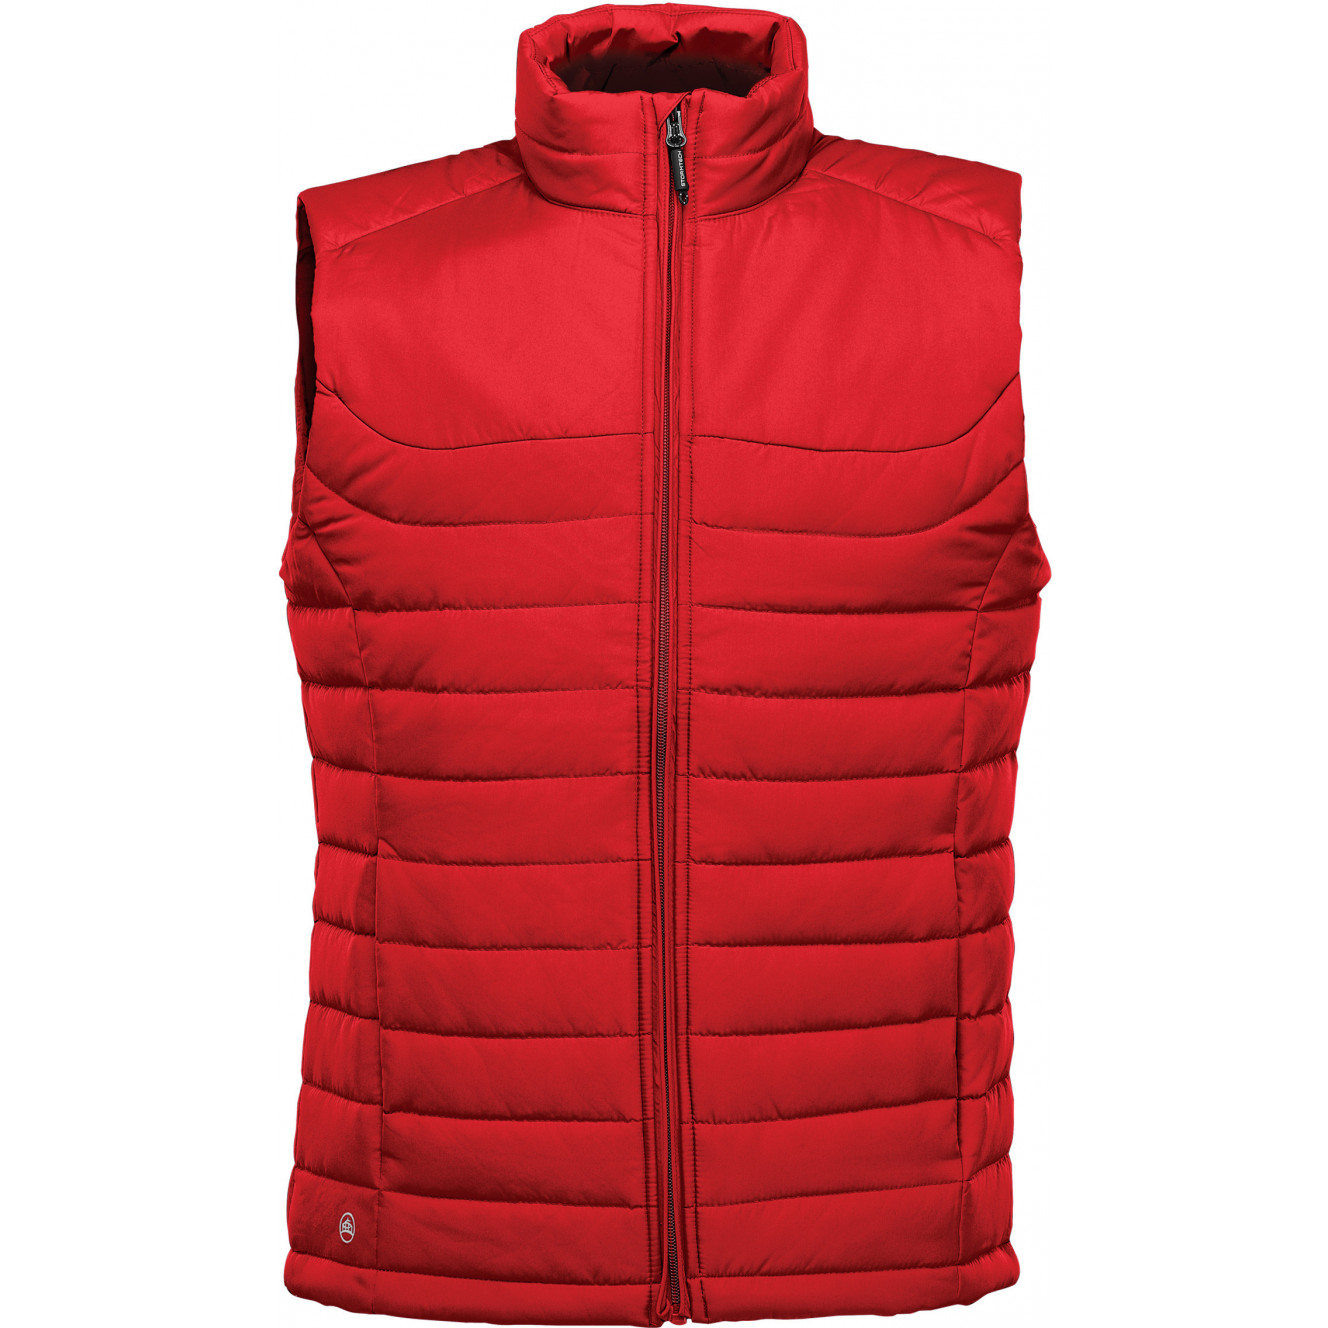 KXV-1_Stormtech_Mens_Nautilius_Quilted_Vest_FRONT_BRIGHTRED